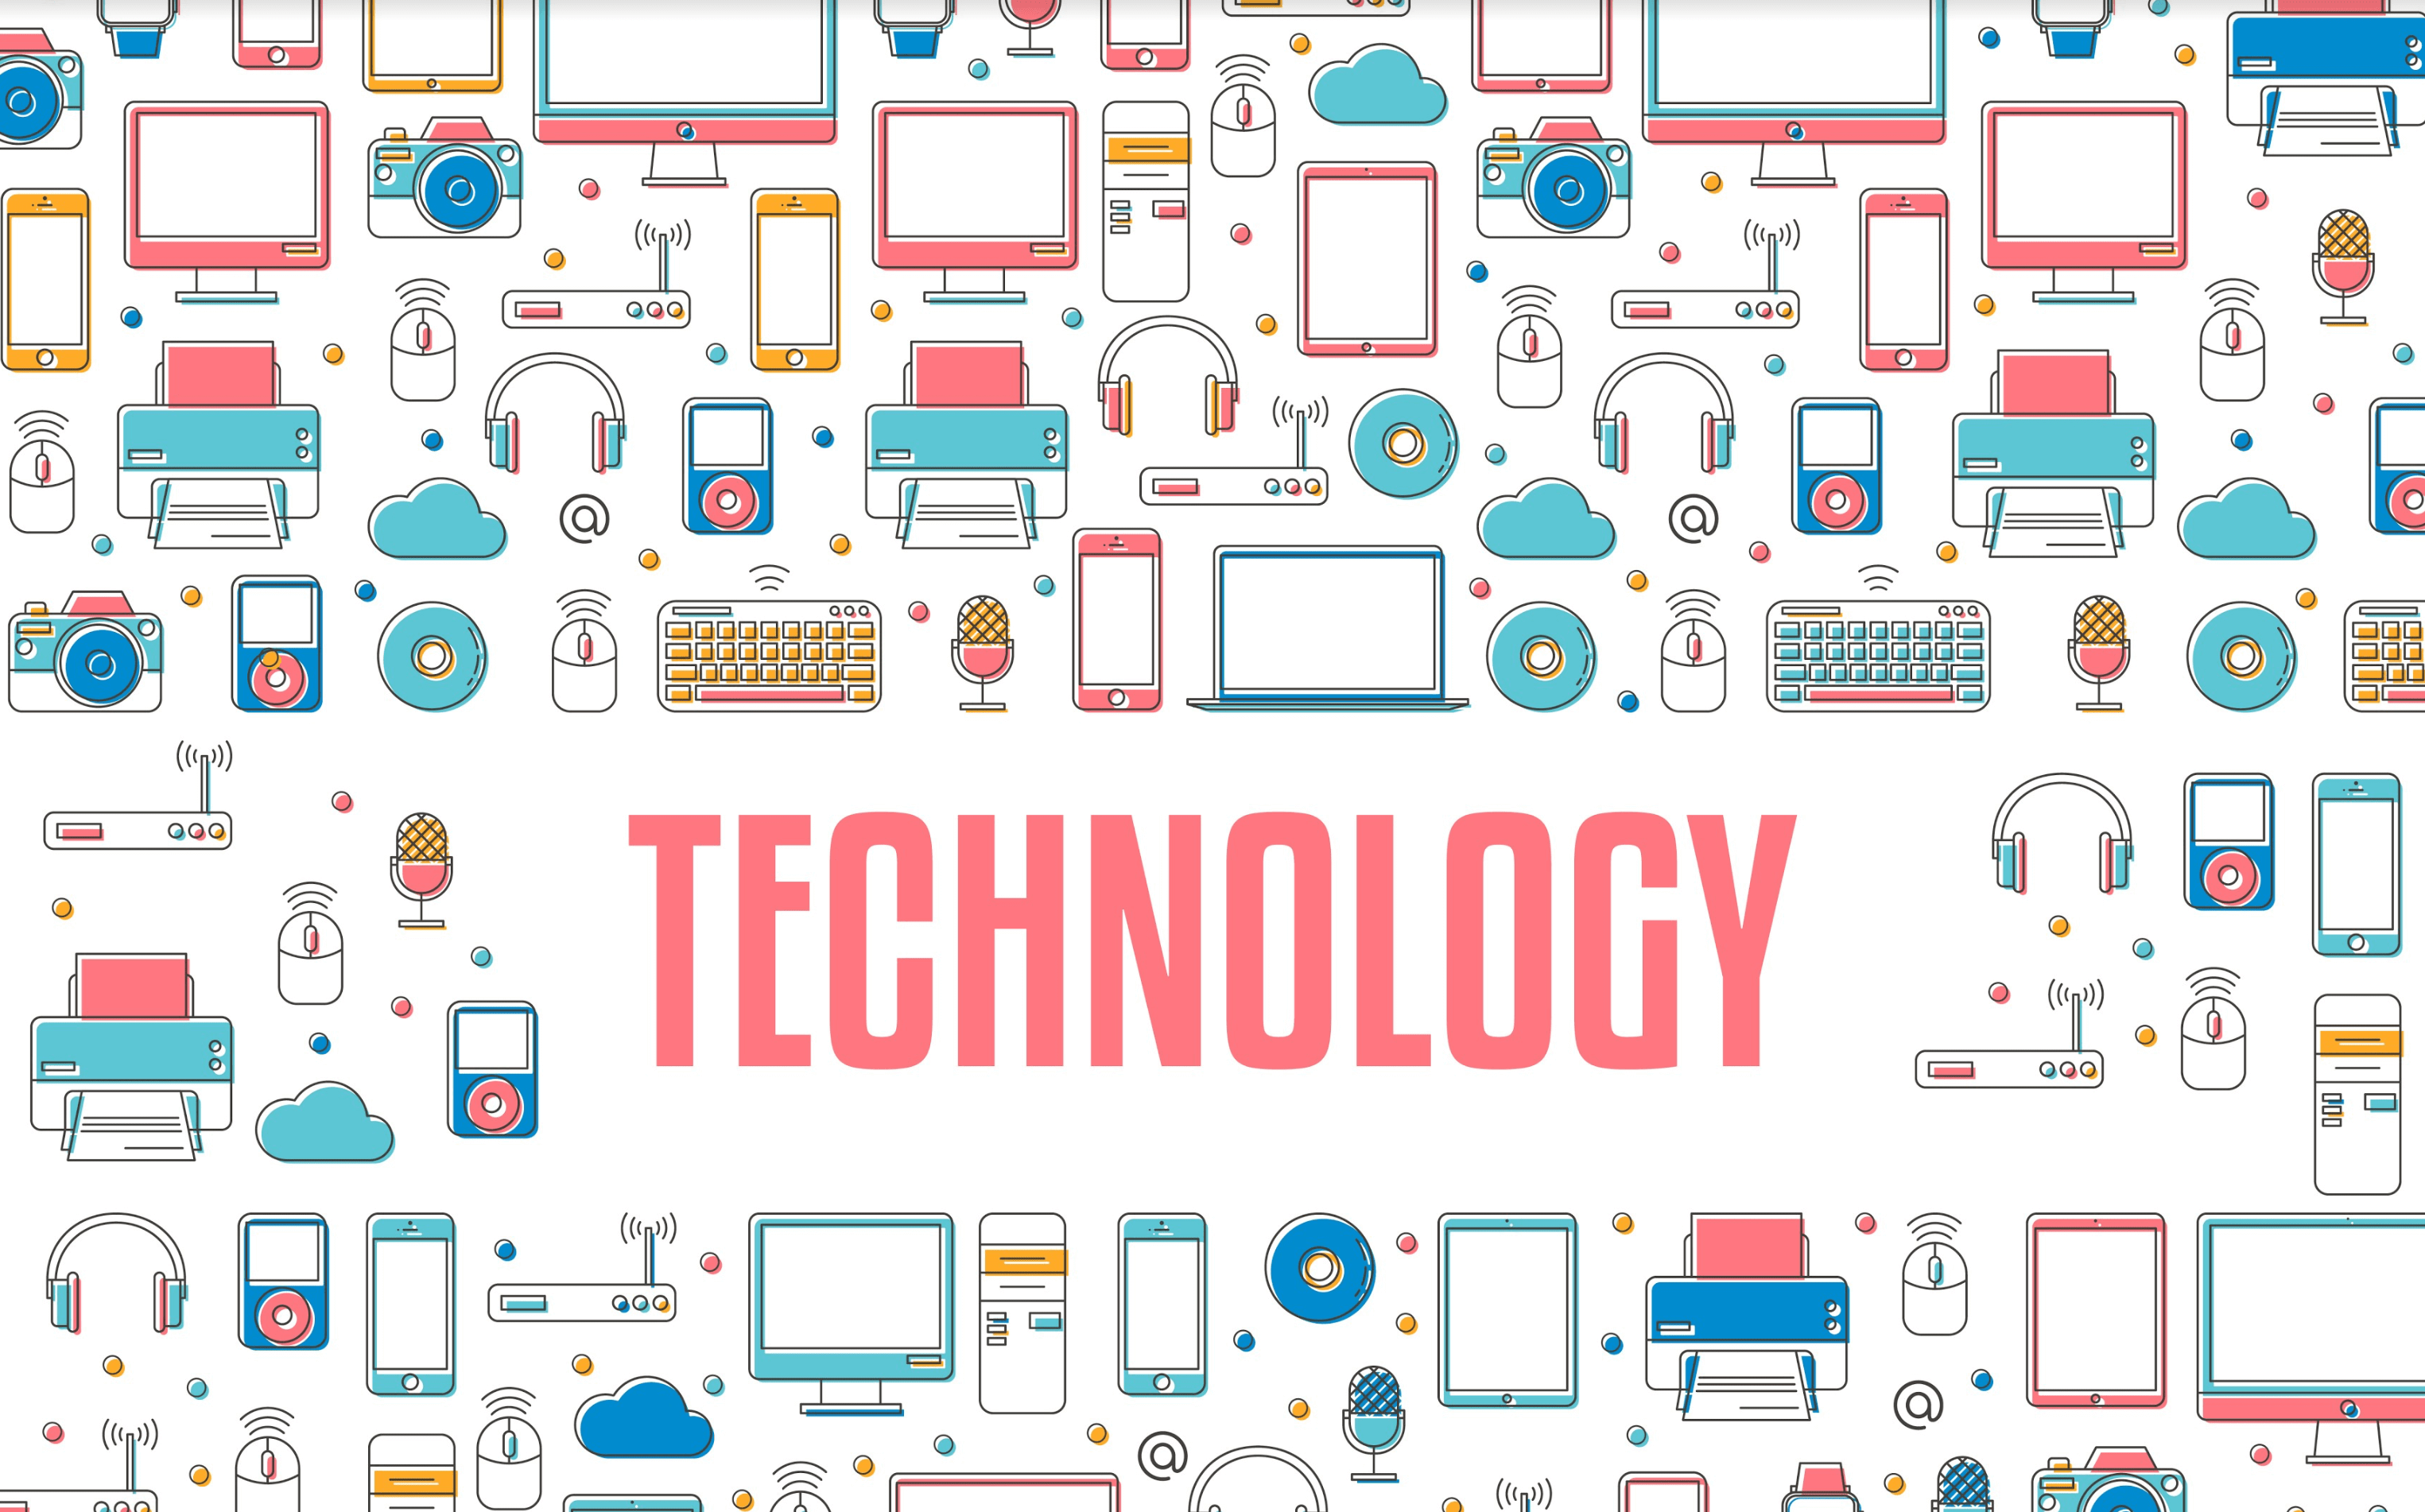 Technology, what is it actually?